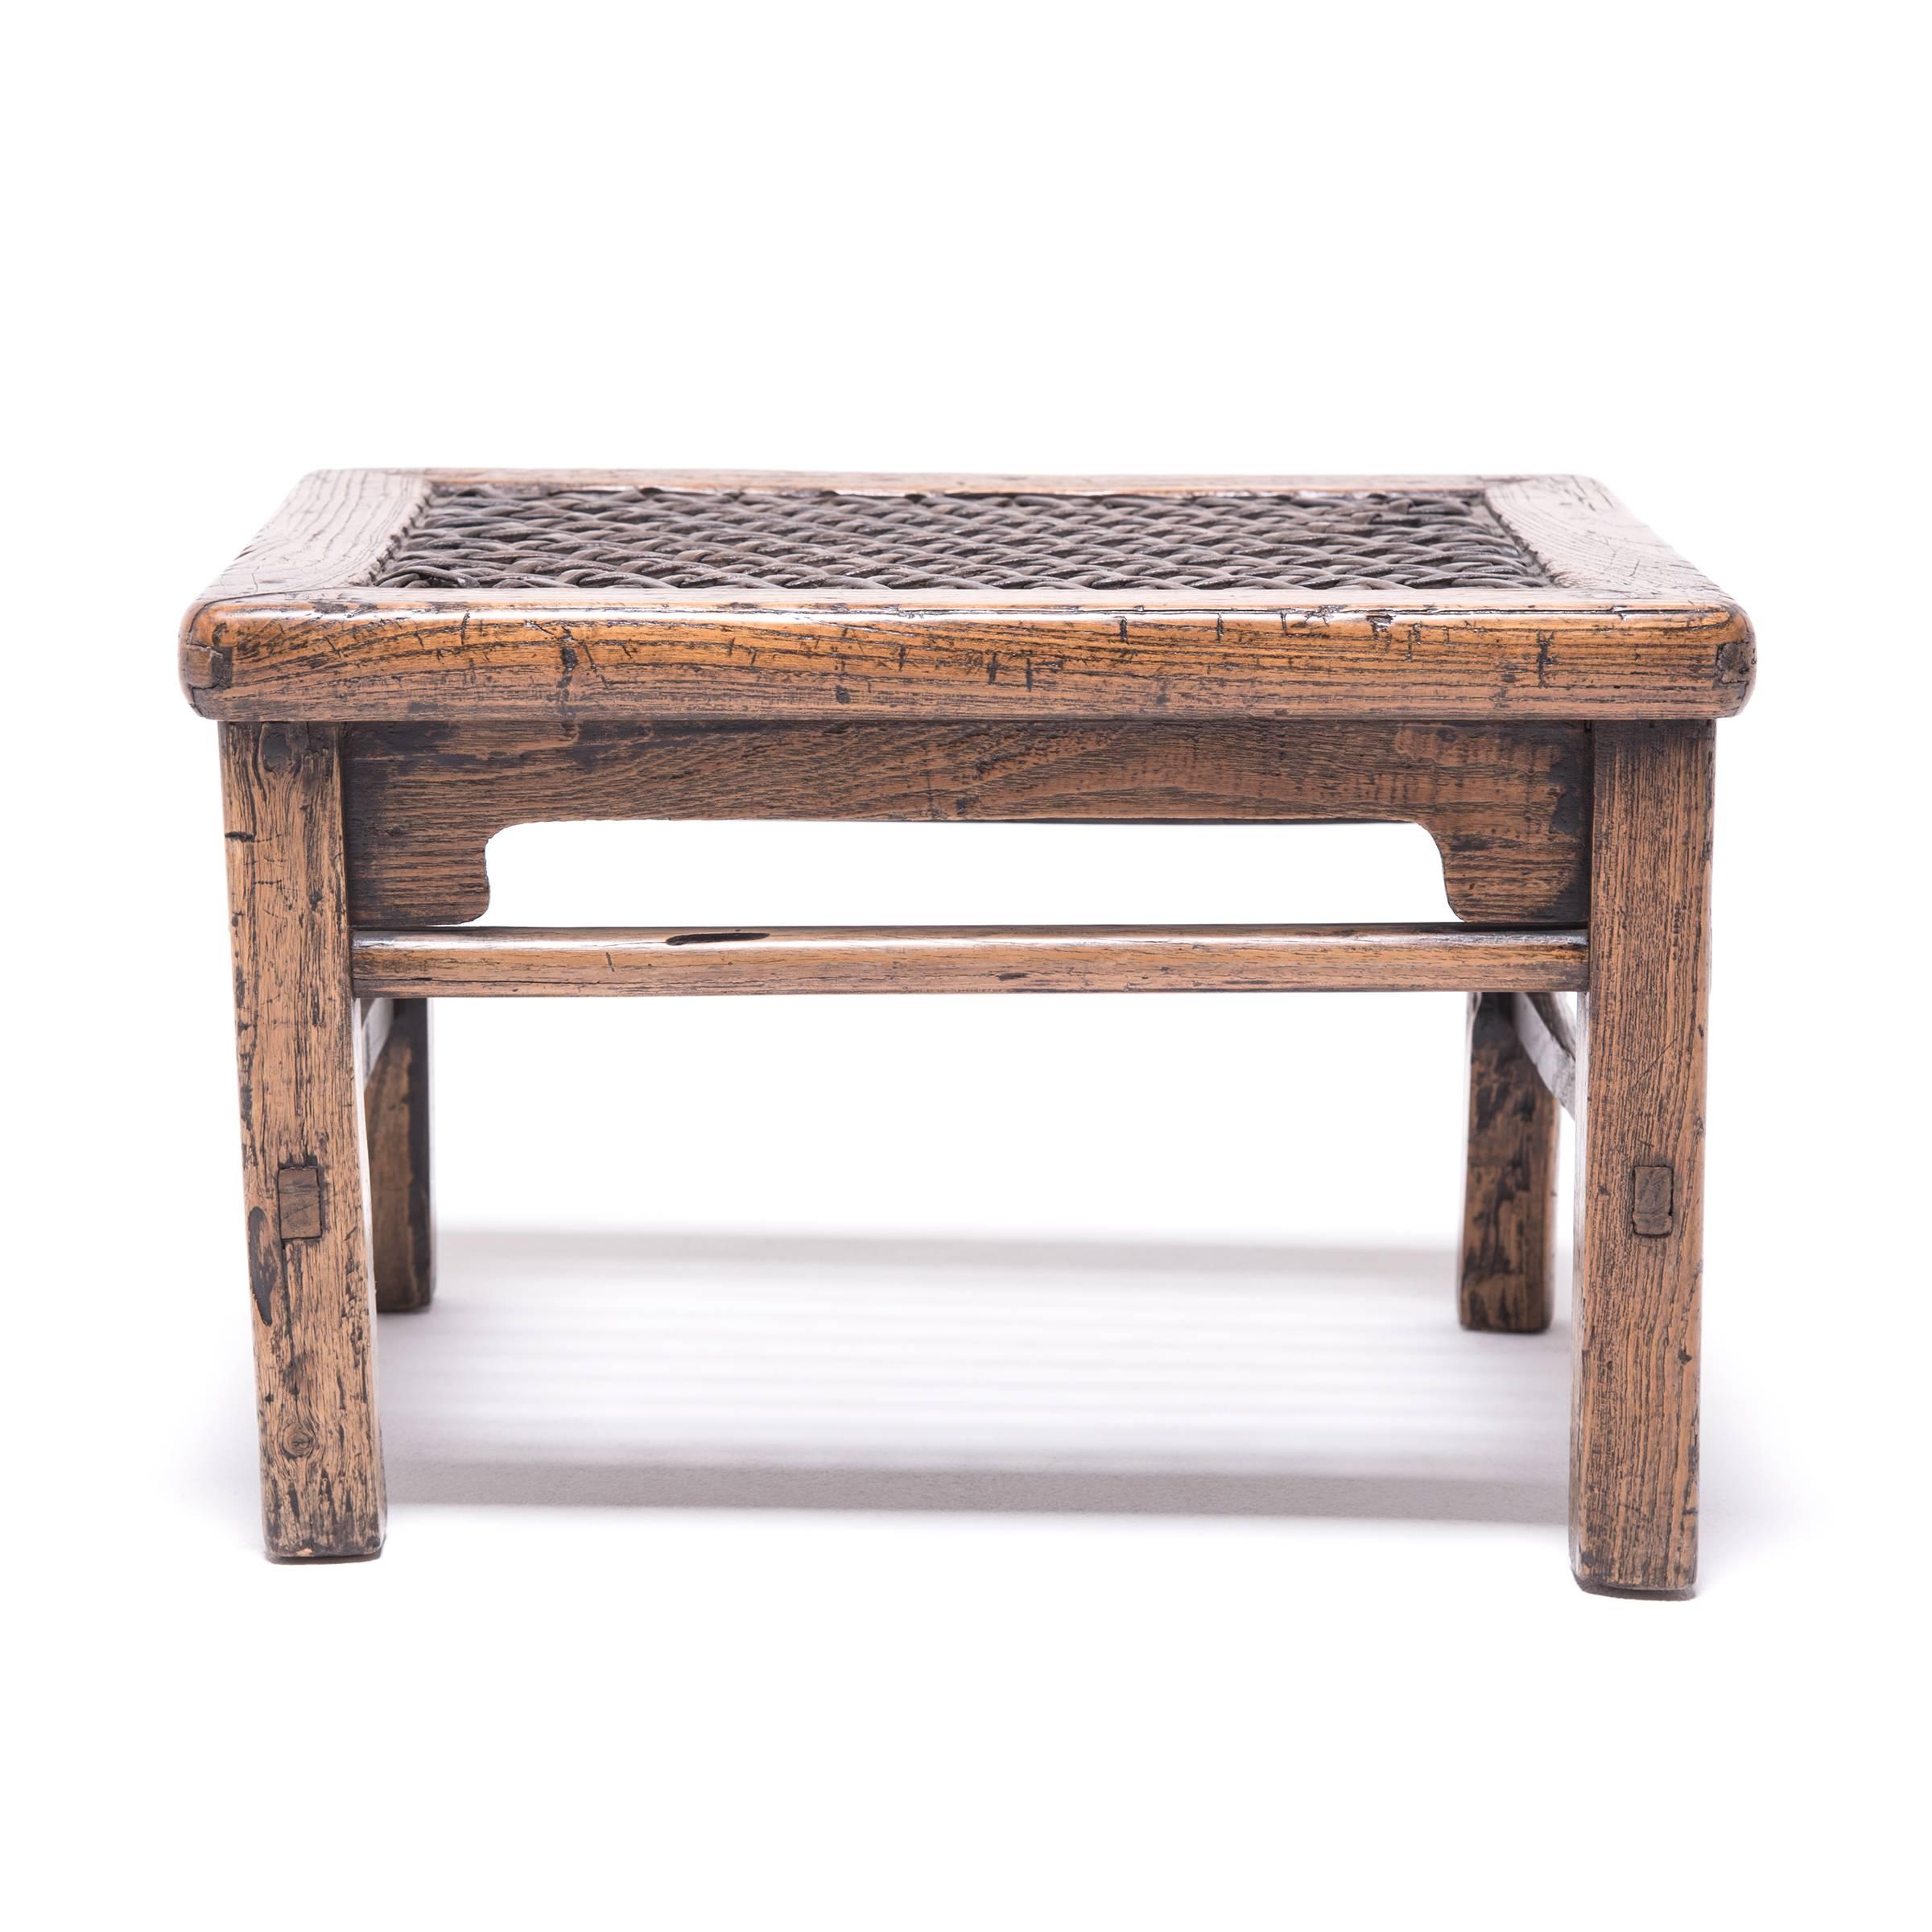 Qing 19th Century Chinese Low Stool with Woven Hide Top